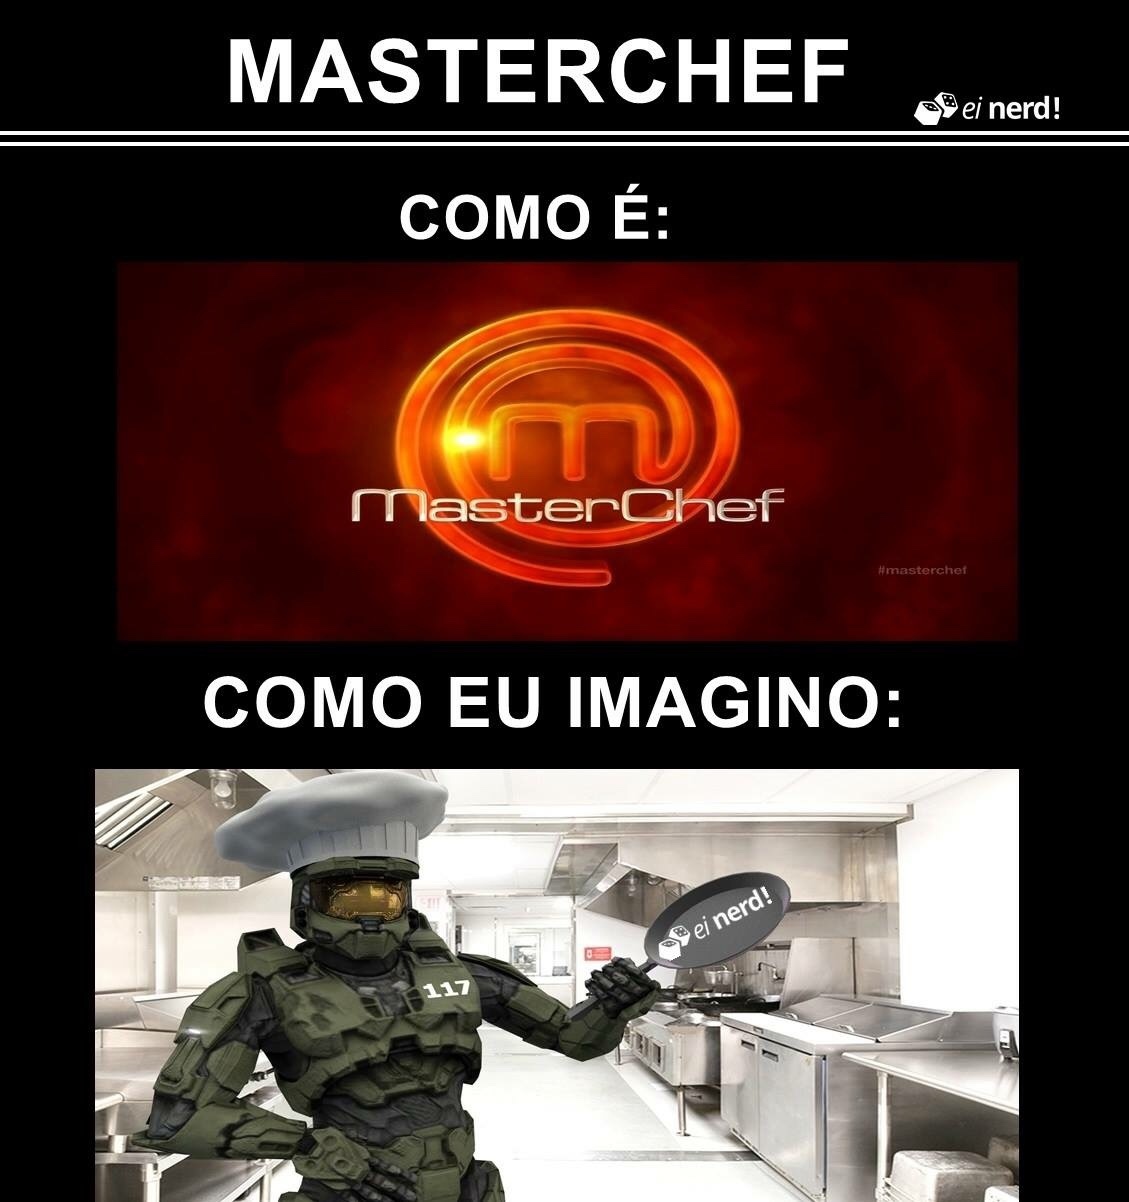 xbox One >>>>PS4>>>>>>>>>>>>>>>>>>>>... the treta gás been planted - meme